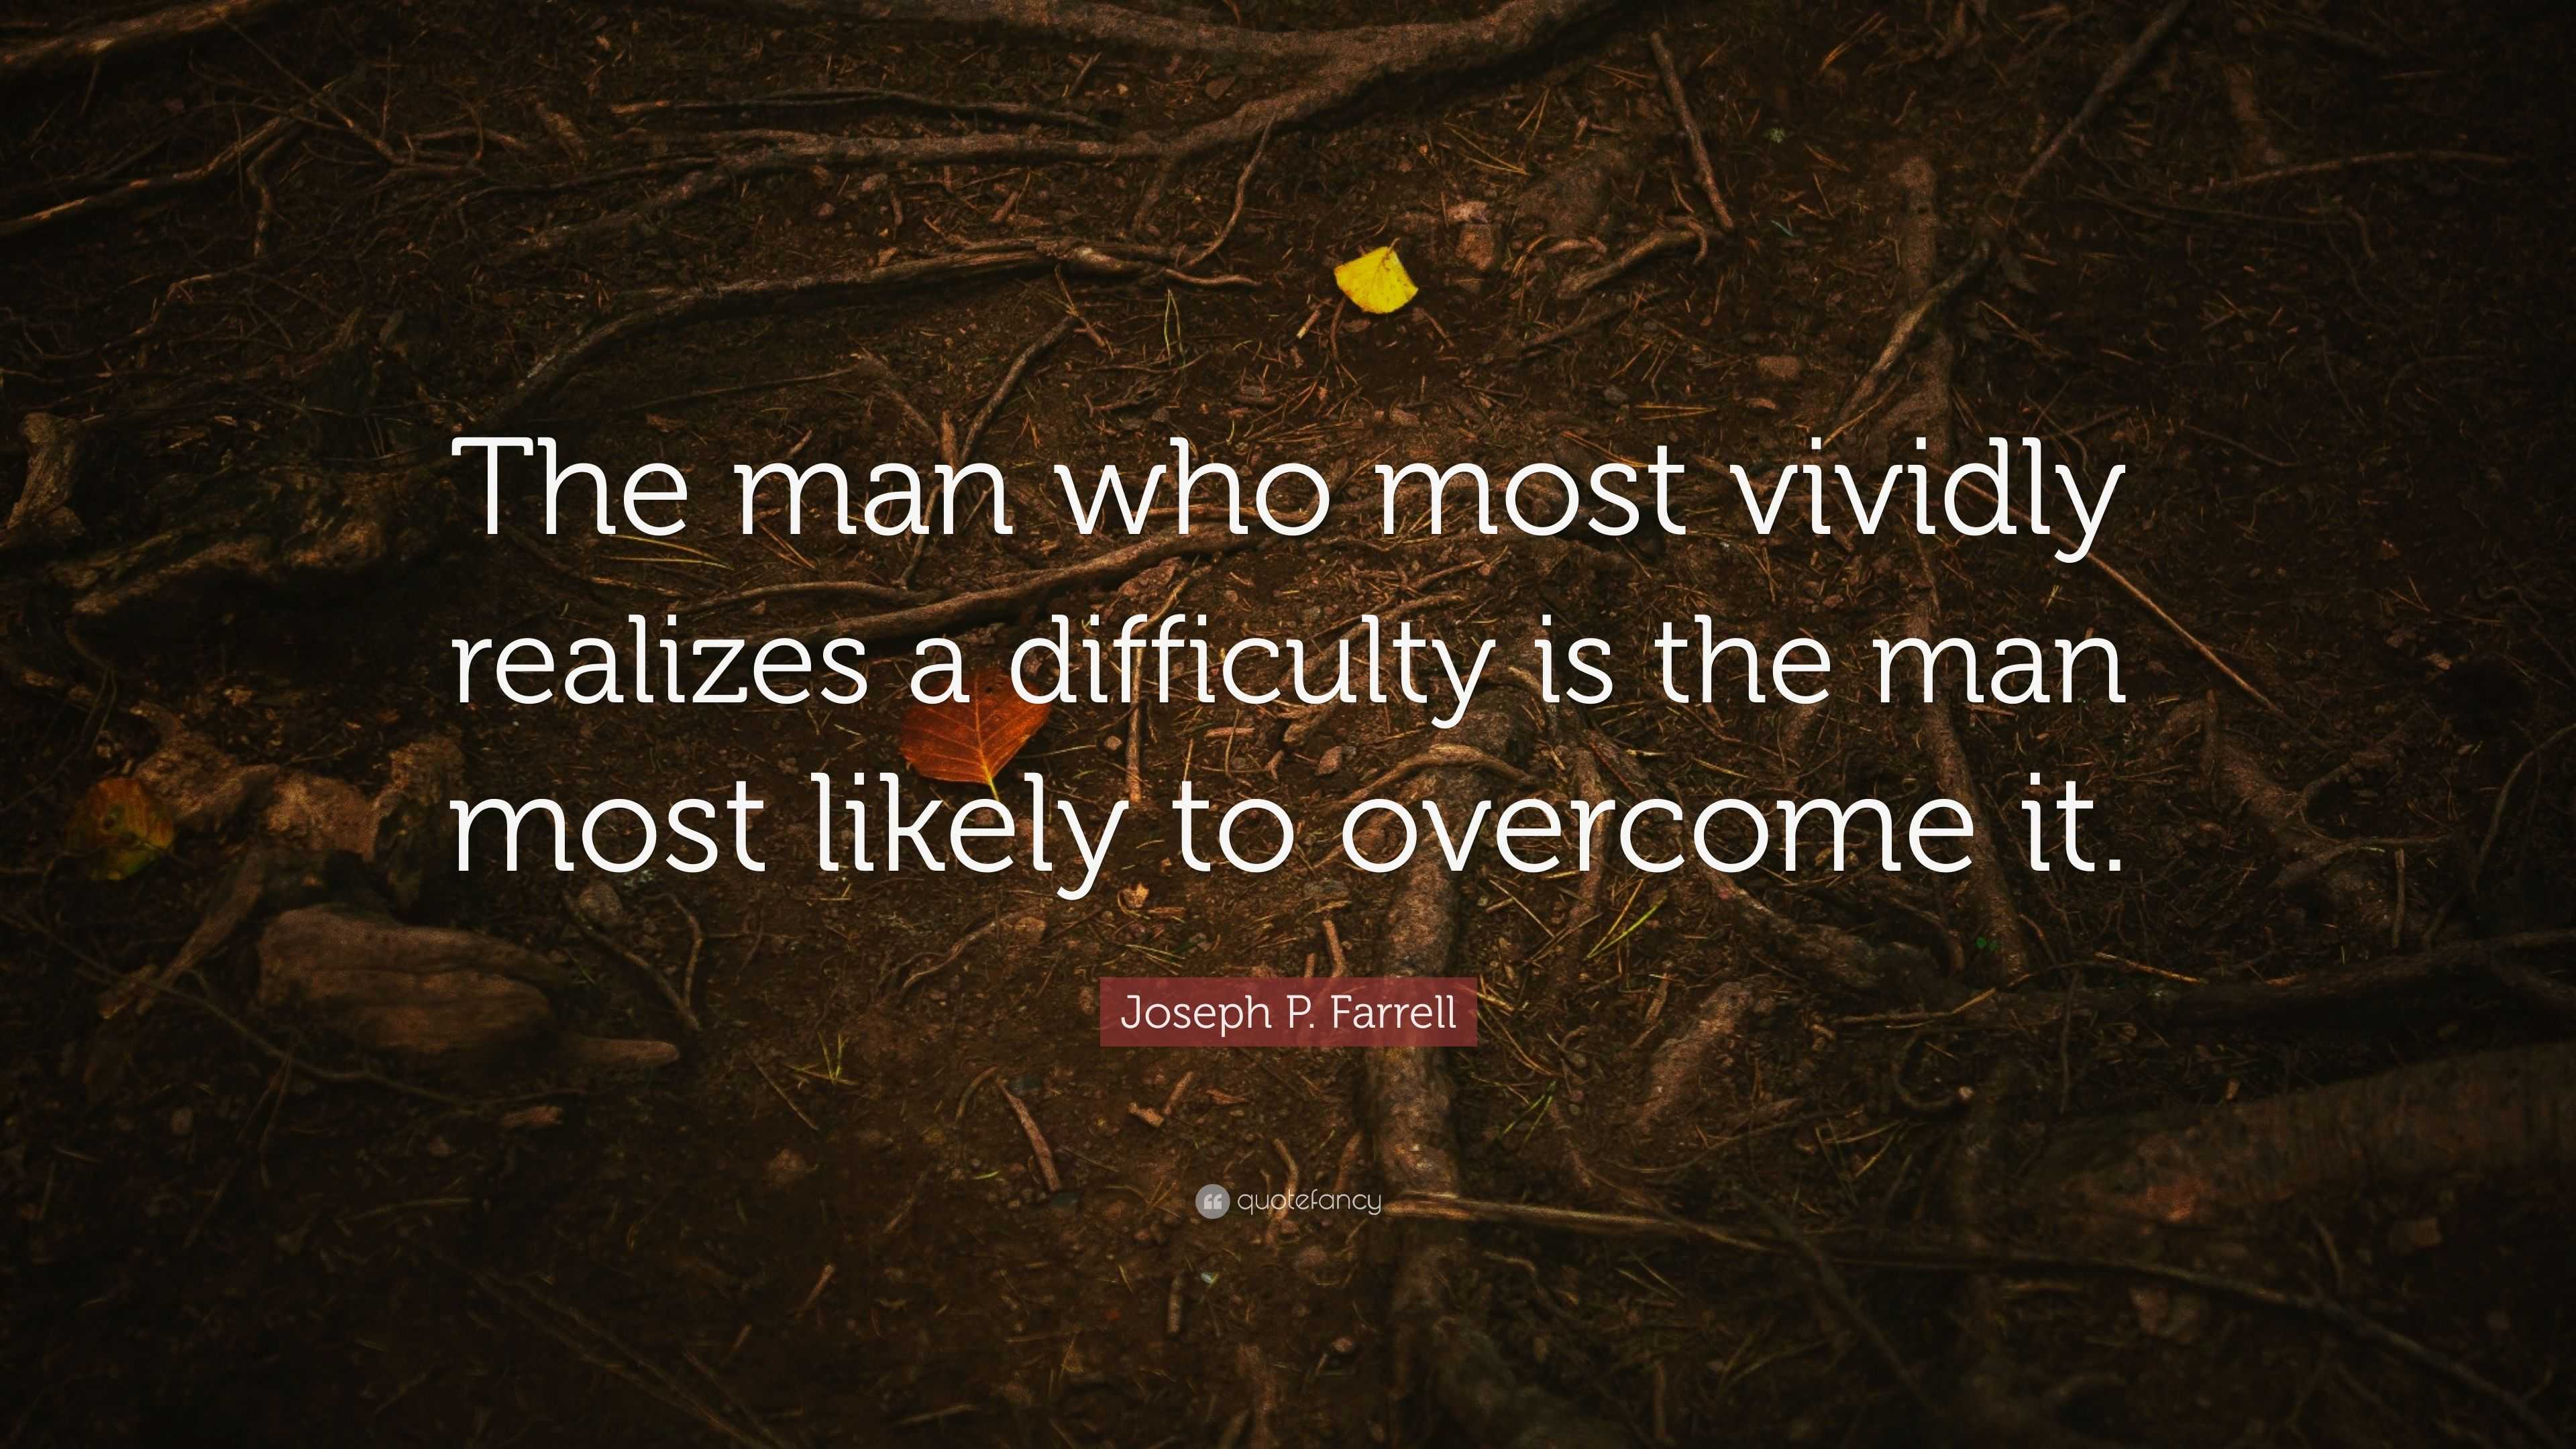 Joseph P. Farrell Quote: “The man who most vividly realizes a